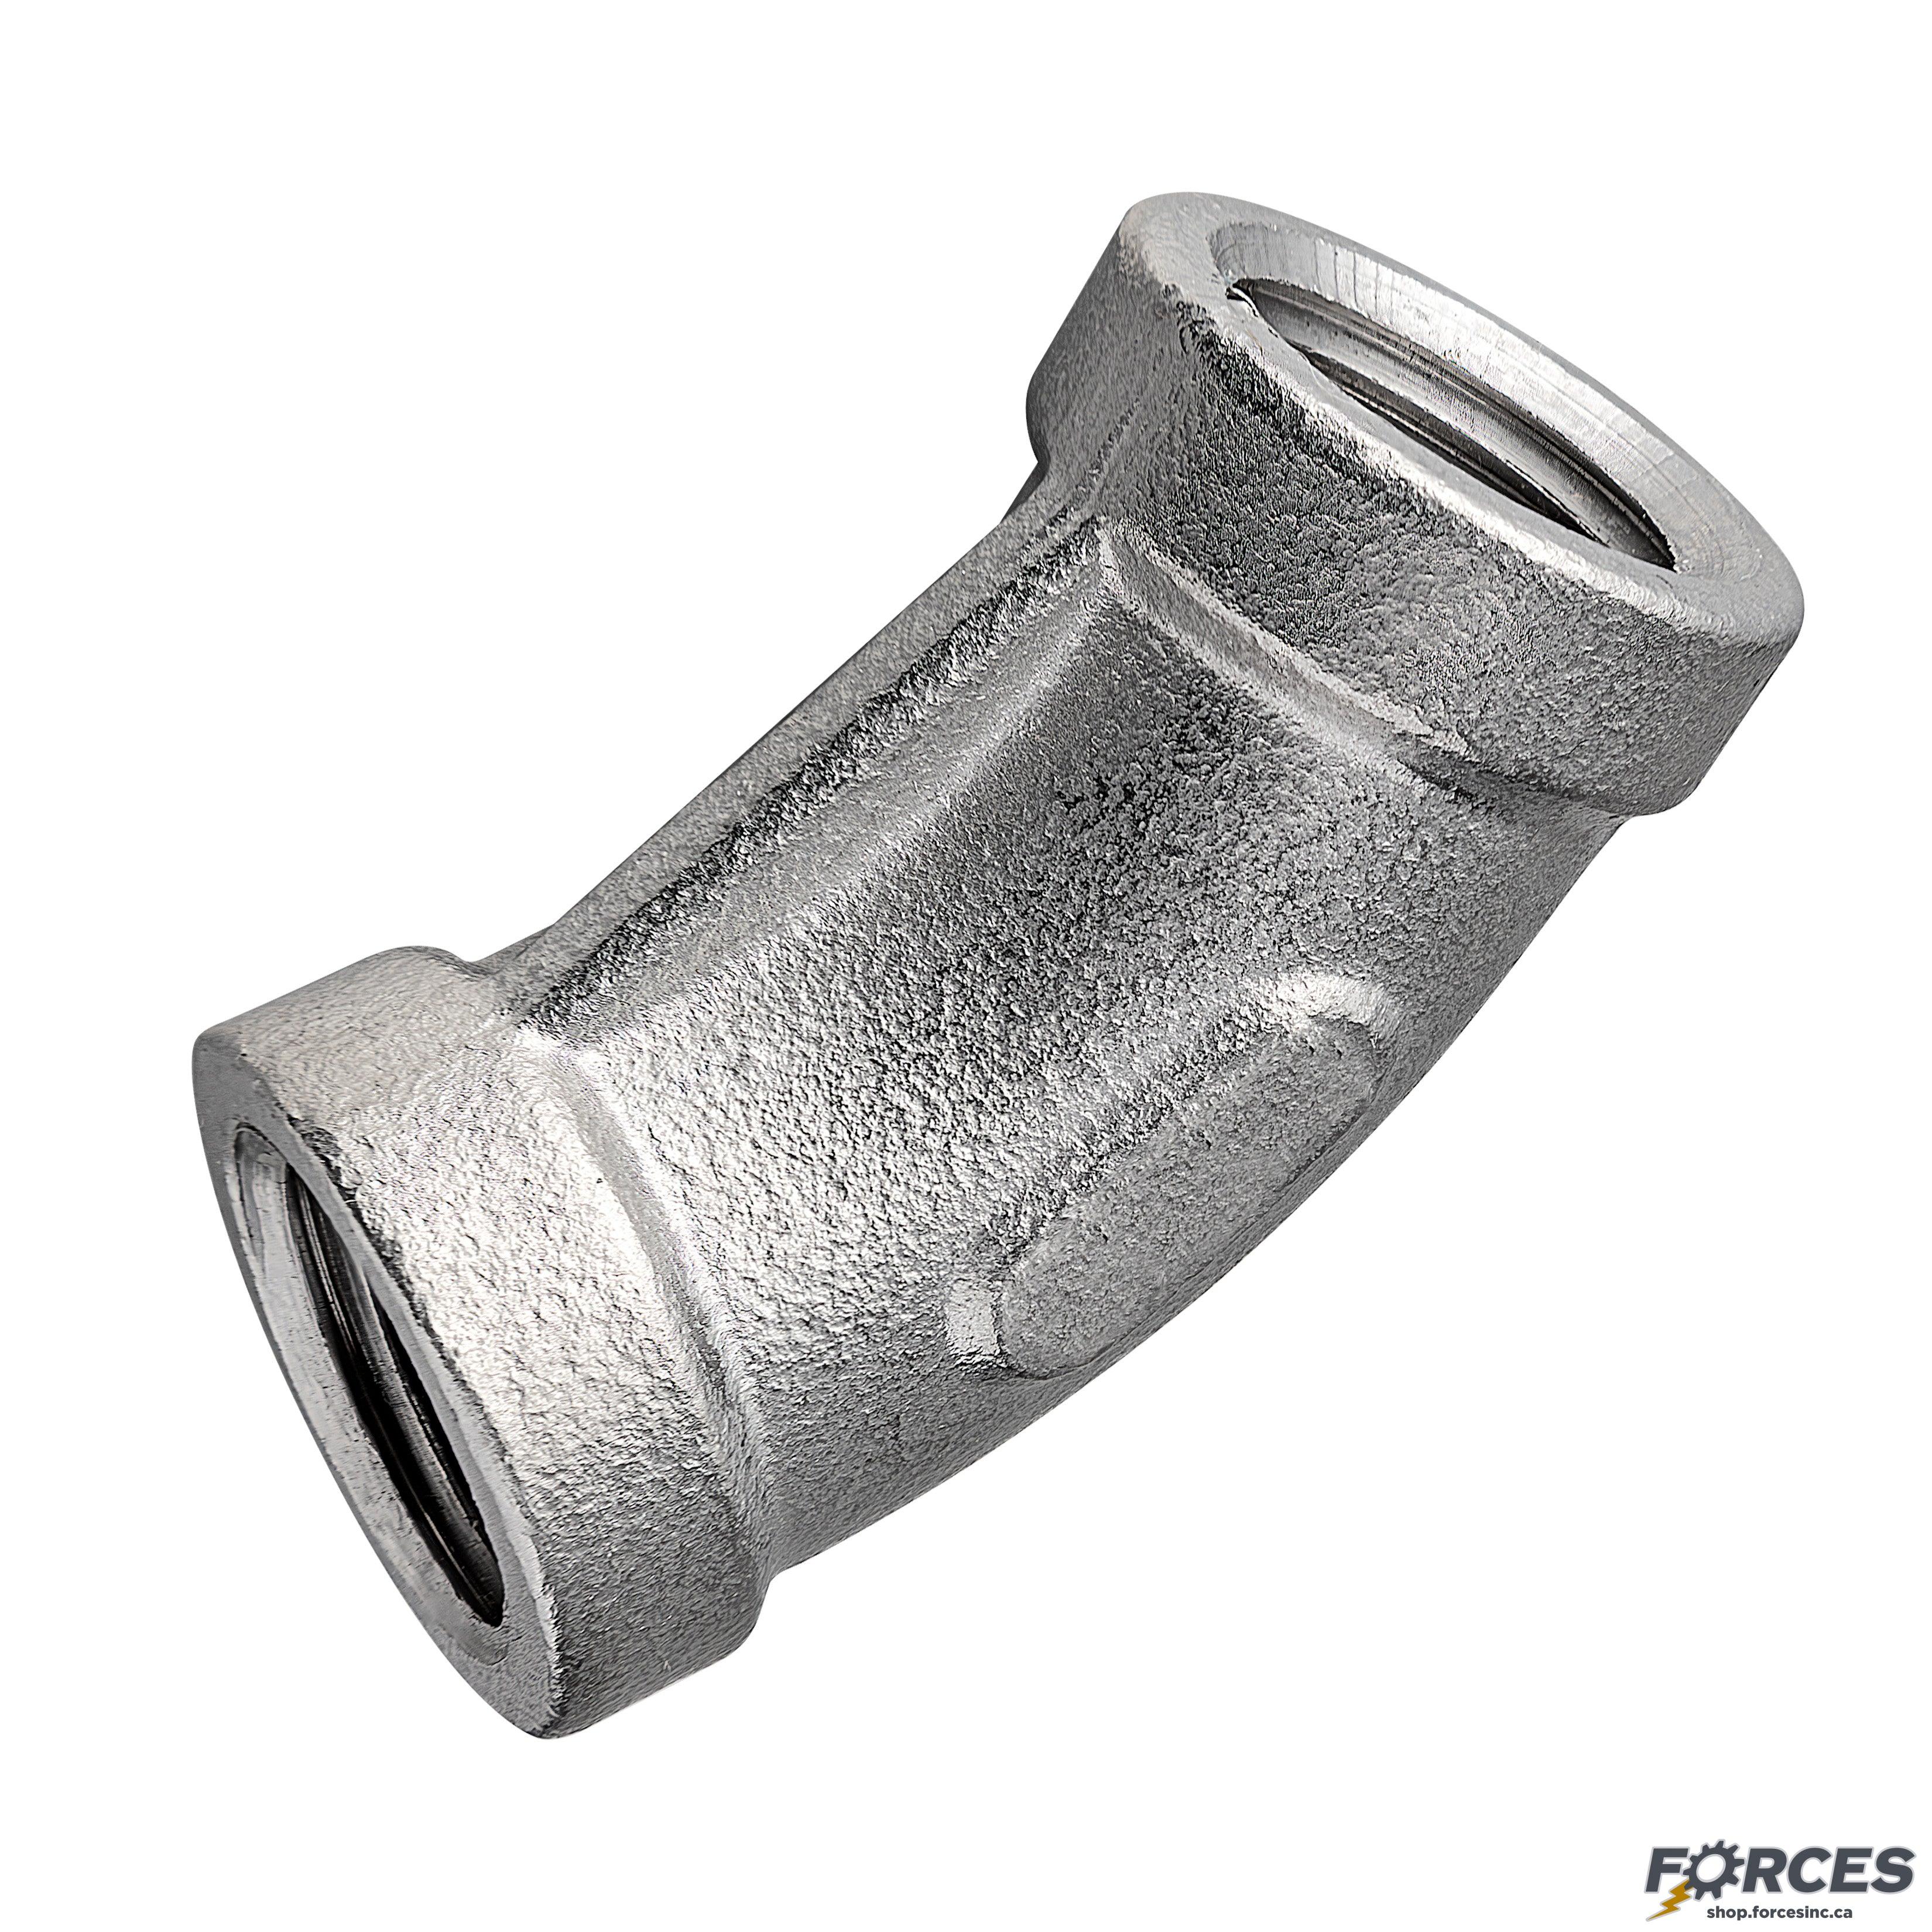 1/2" Elbow 45° NPT #150 - Stainless Steel 316 - Forces Inc